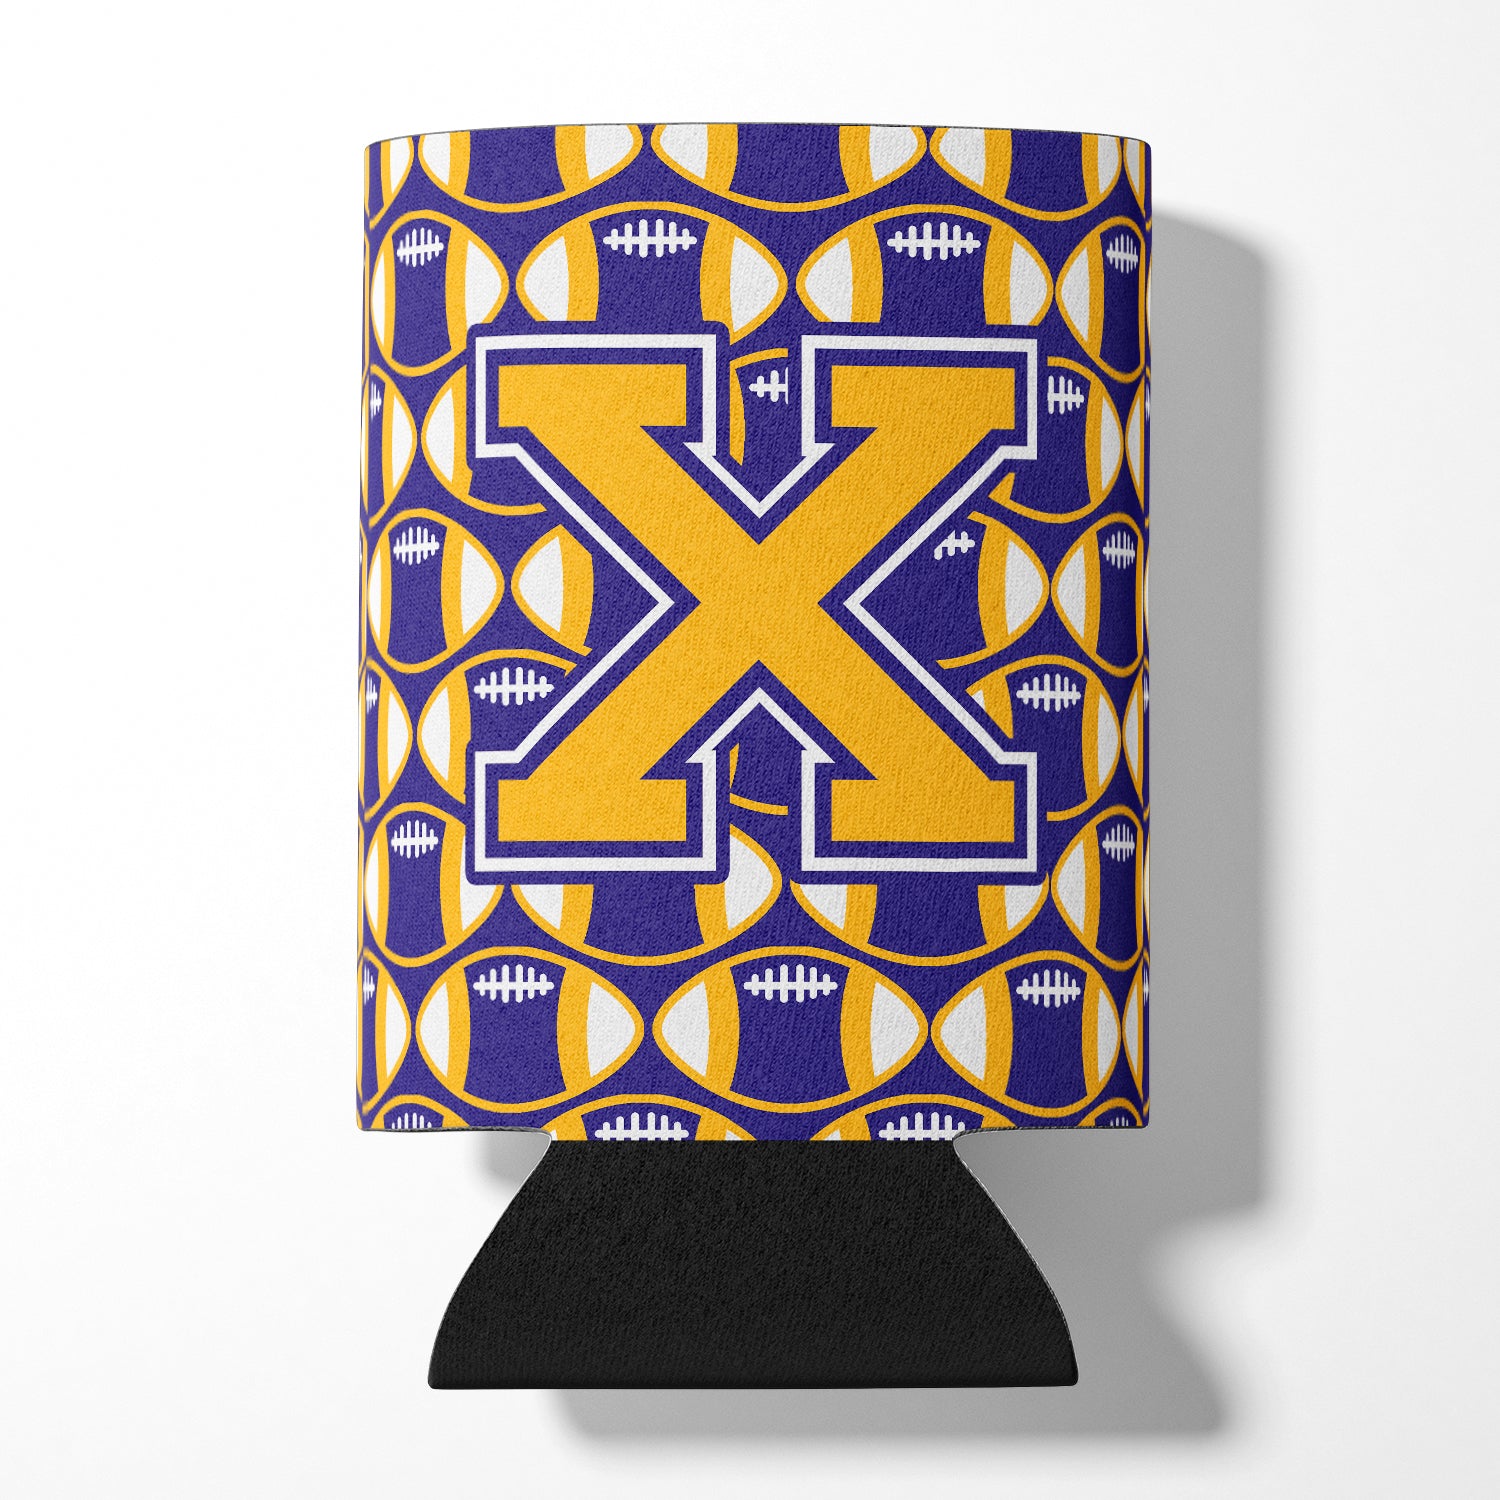 Letter X Football Purple and Gold Can or Bottle Hugger CJ1064-XCC